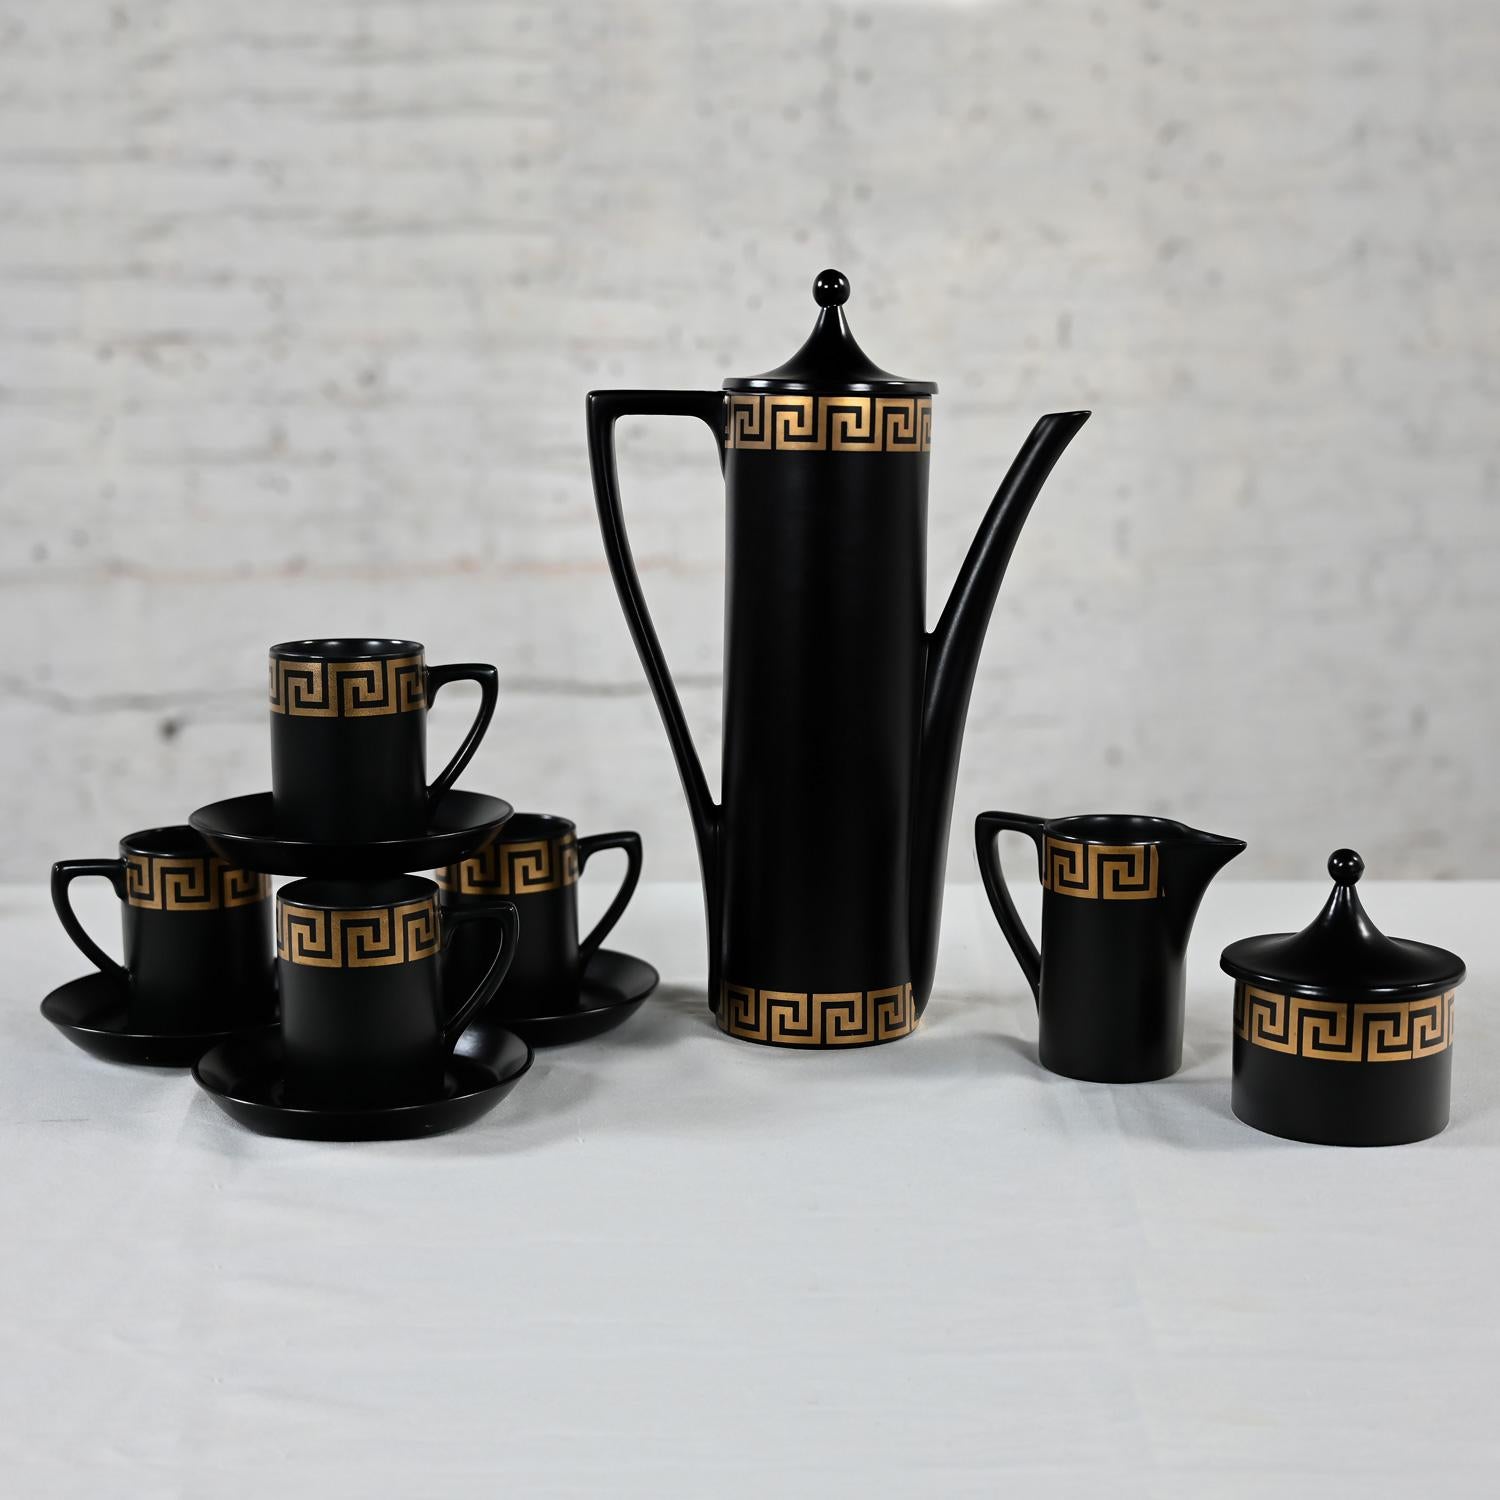 Incredible vintage MCM (Mid-Century Modern) to Modern Portmeirion Pottery espresso coffee service with demitasse cups in black and gilded Greek Key detail by Susan Williams Ellis Designs. Comprised of 1 tall coffee pot with a lid, 1 creamer, 1